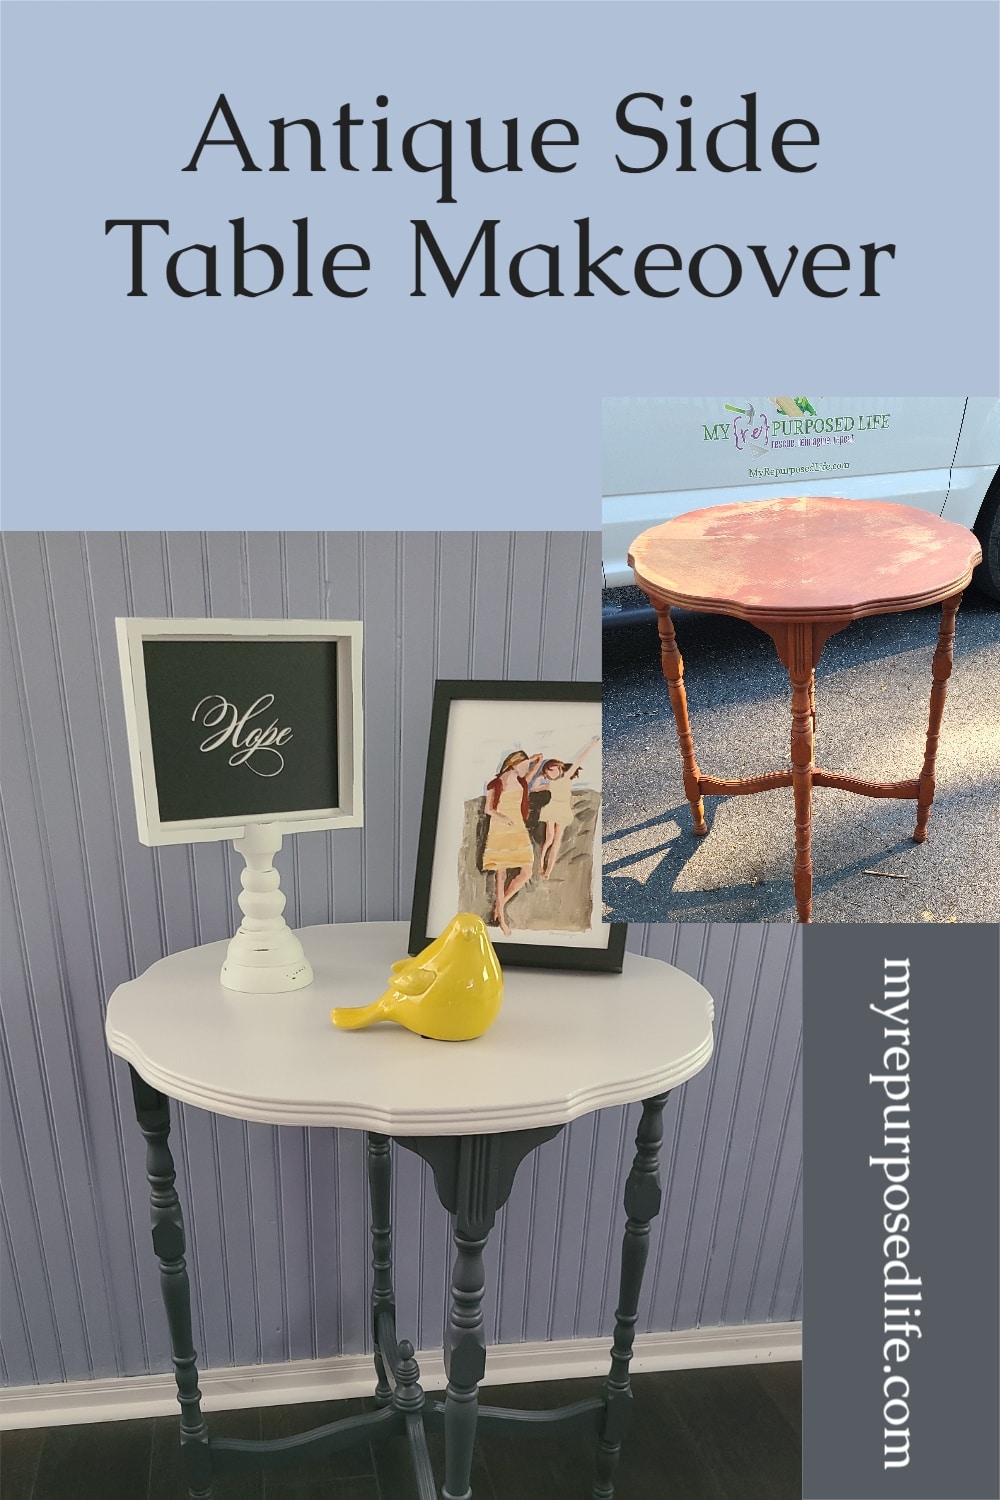 Don't throw out that antique side table. With a little paint, you can have a new two toned table, perfect for any corner in your home. #MyRepurposedLife #antique #sidetable #makeover #furniture #htp via @repurposedlife